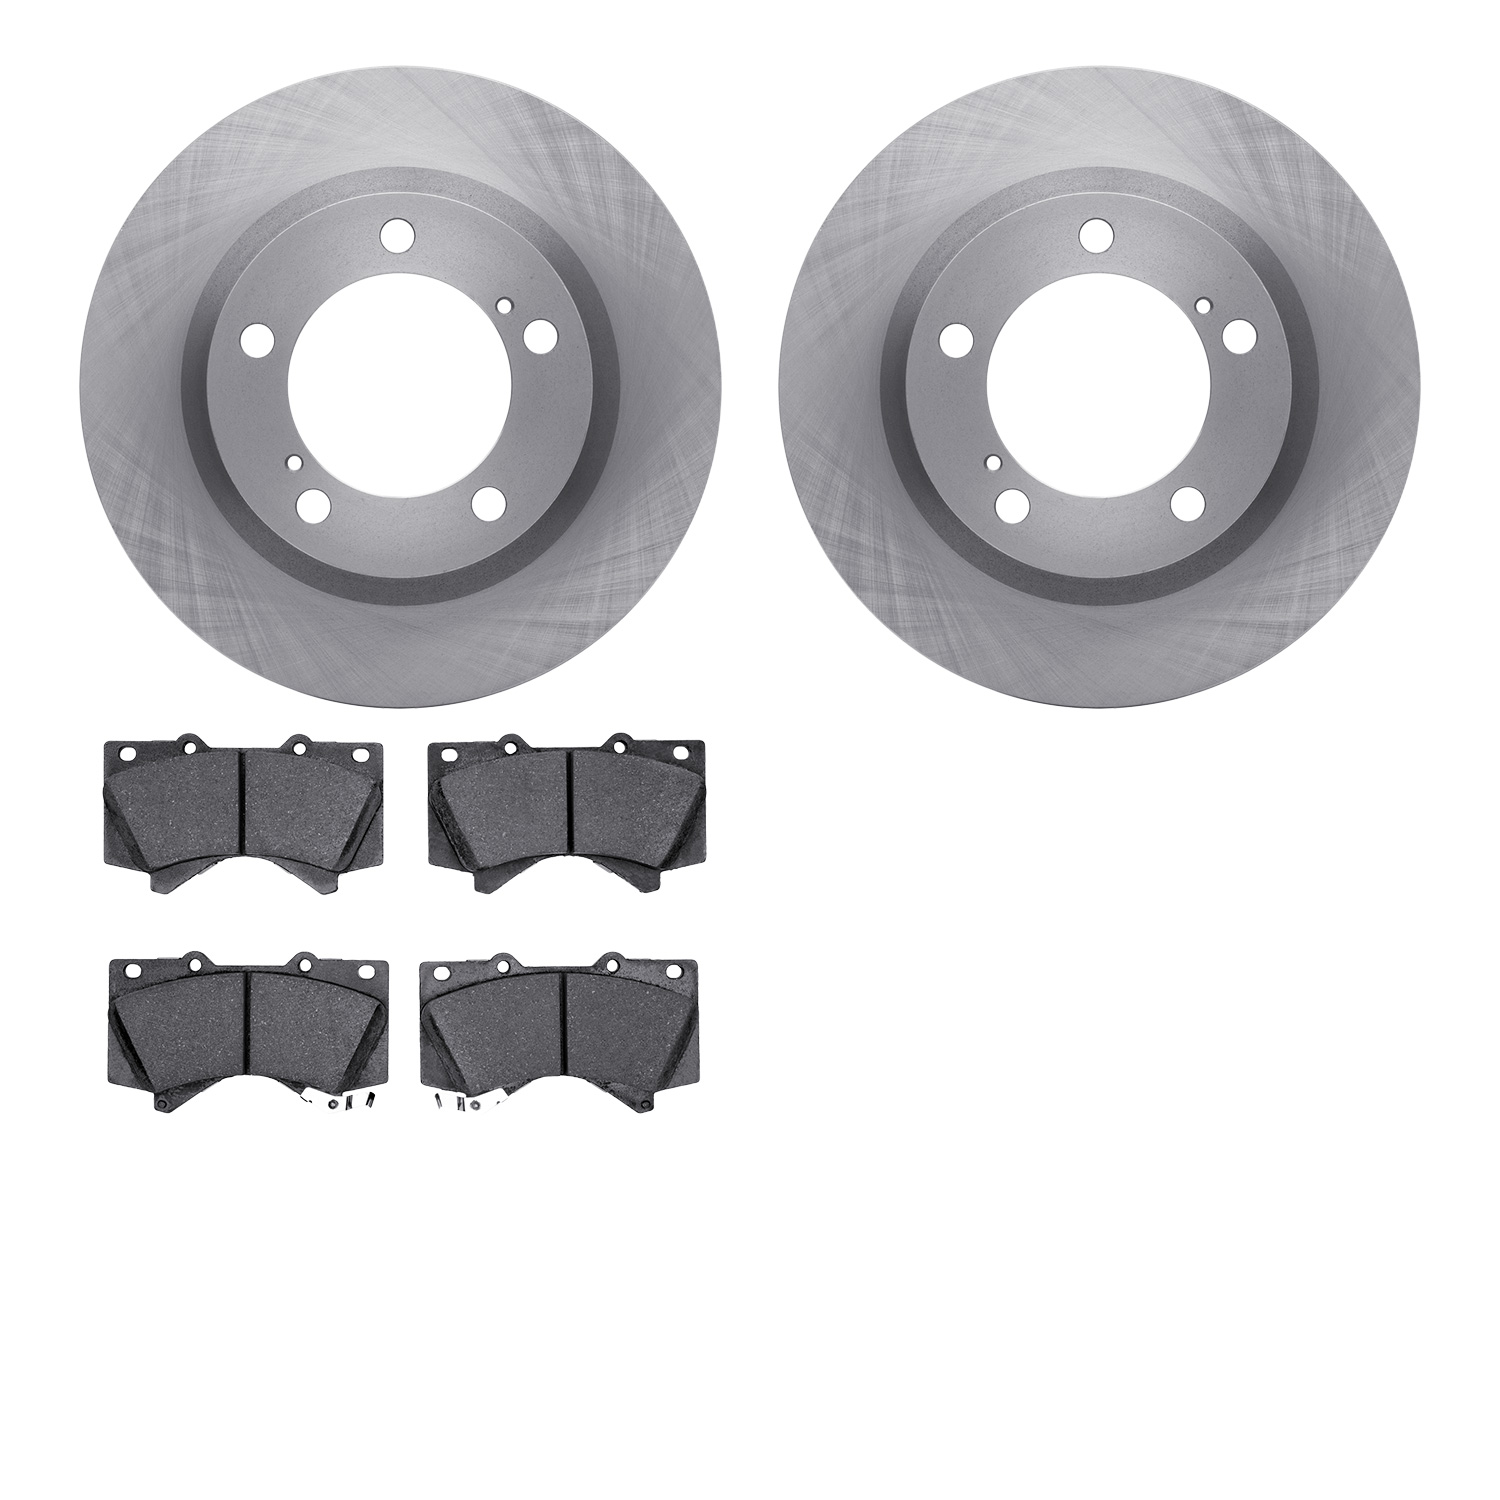 6402-76064 Brake Rotors with Ultimate-Duty Brake Pads, 2008-2021 Lexus/Toyota/Scion, Position: Front